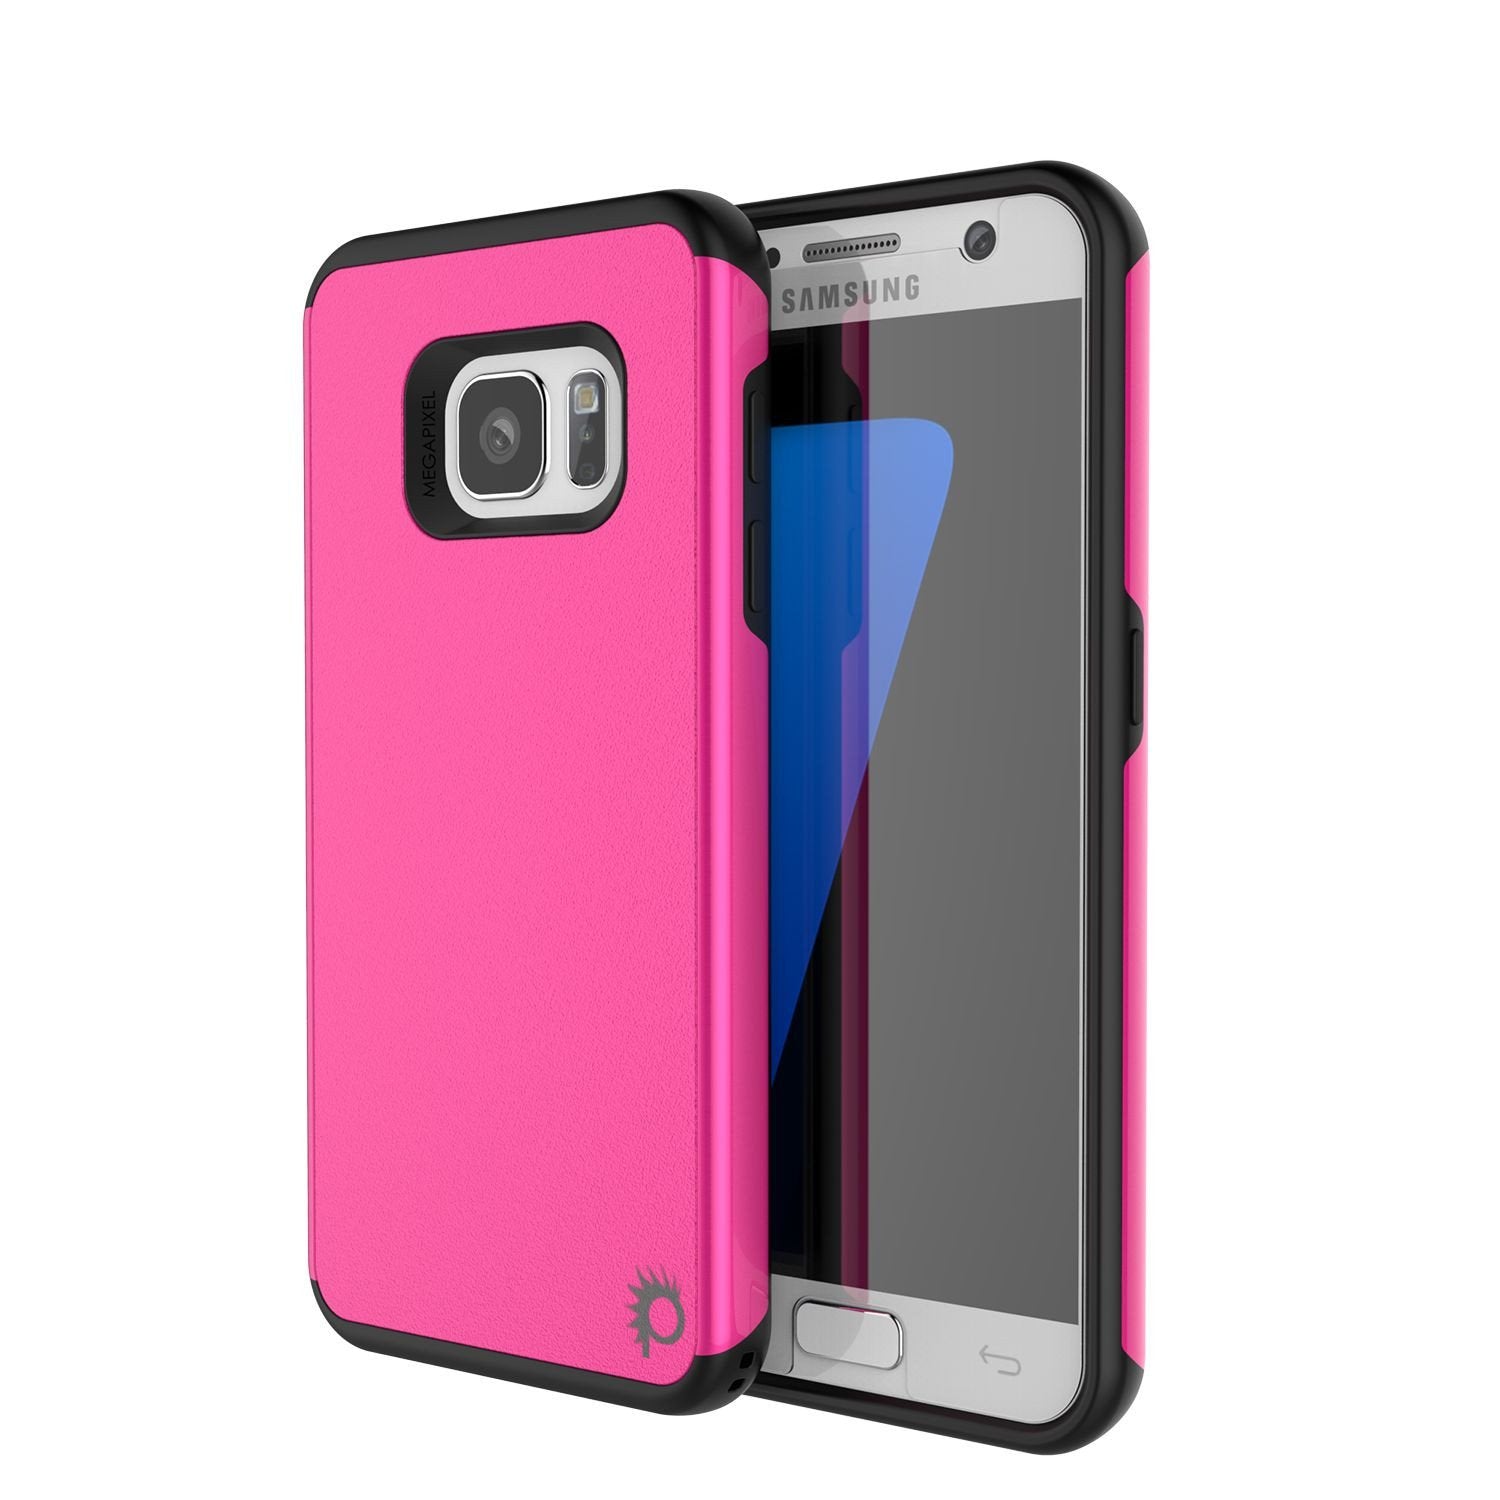 Galaxy s7 Case PunkCase Galactic Pink Series Slim Protective Armor Soft Cover Case w/ Tempered Glass